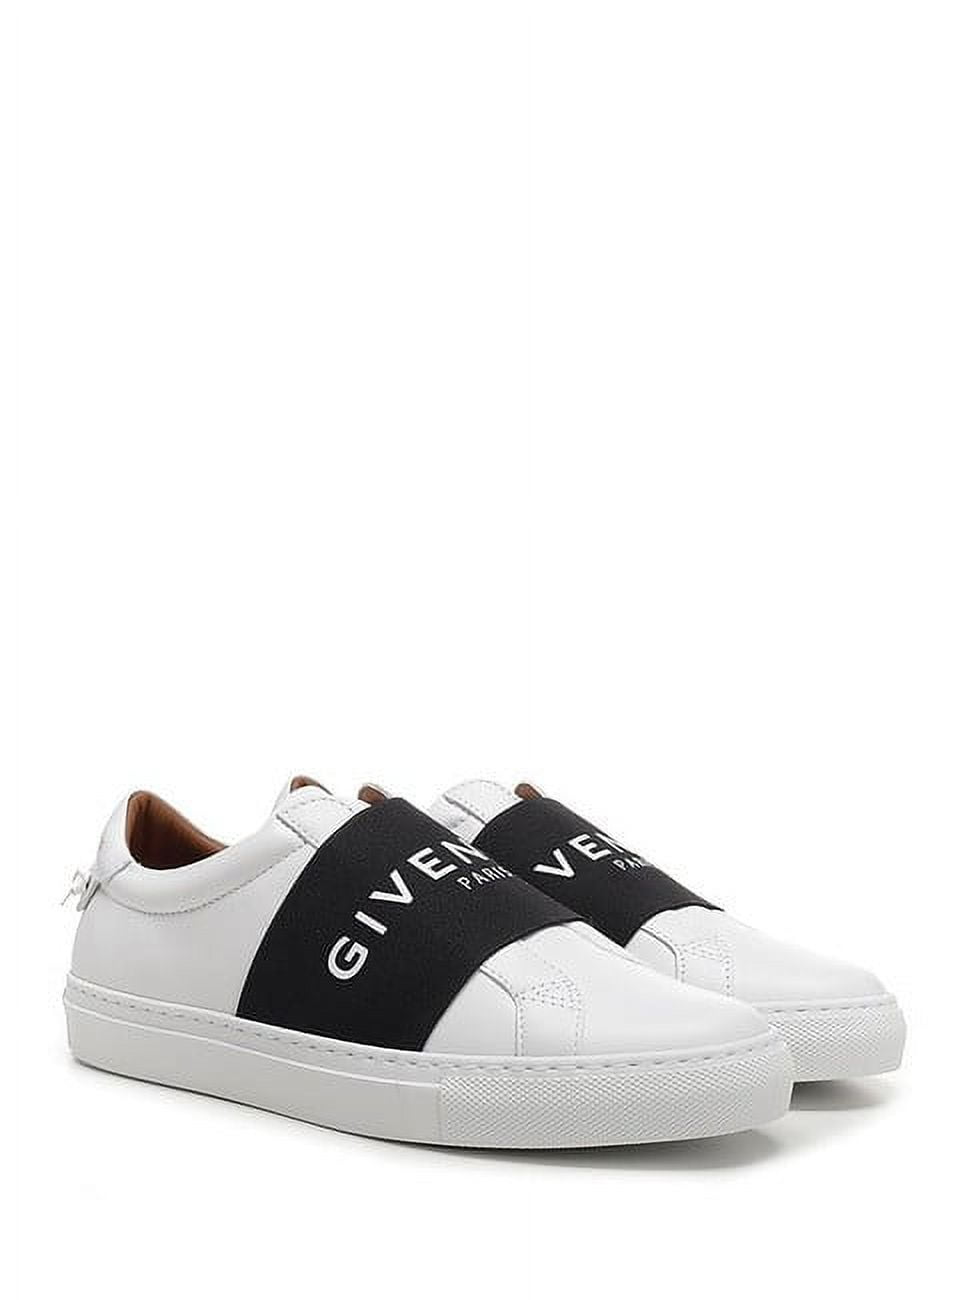 City Sport leather sneakers in black - Givenchy | Mytheresa